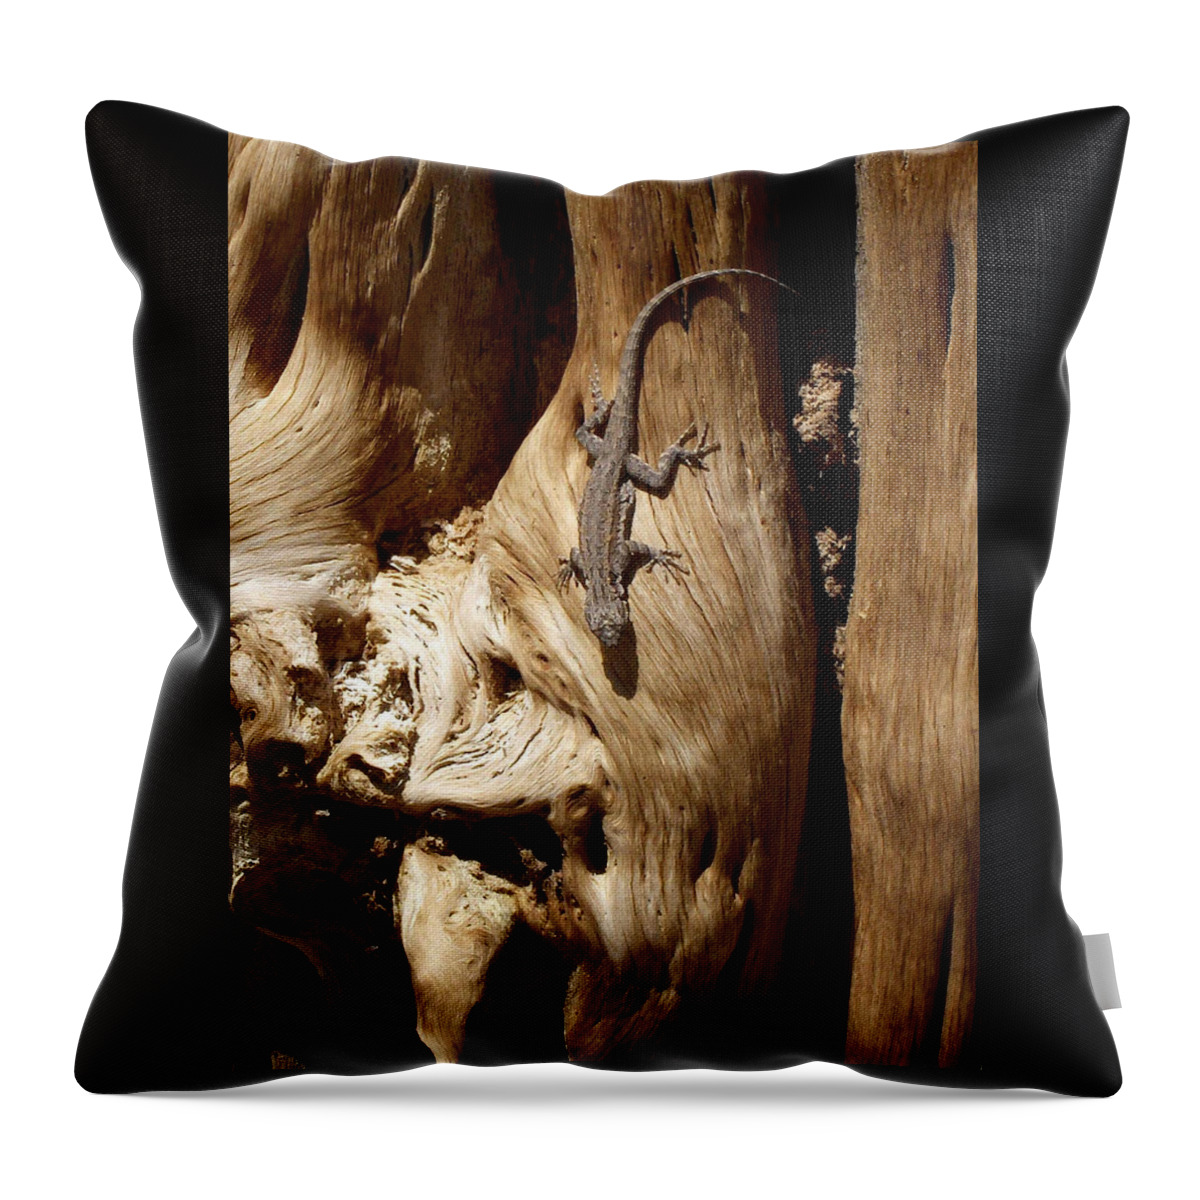 United States Throw Pillow featuring the photograph Lizard by Richard Gehlbach